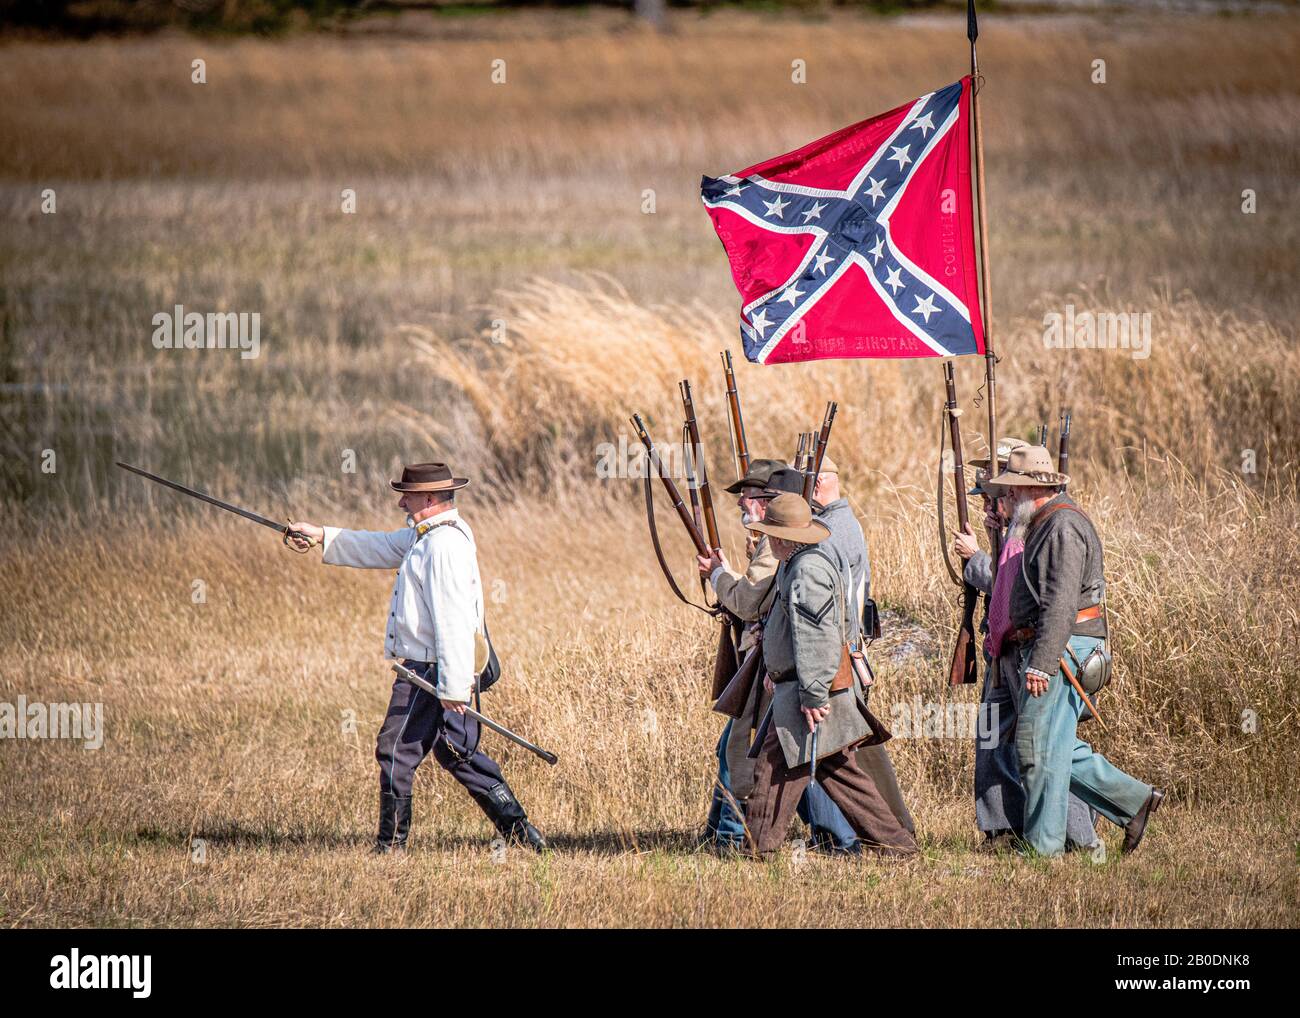 Brooksville, FL - January 18, 2020: Reenactor leads his civil war soldiers to the battle, under the colors of the confederate battle flag. Stock Photo